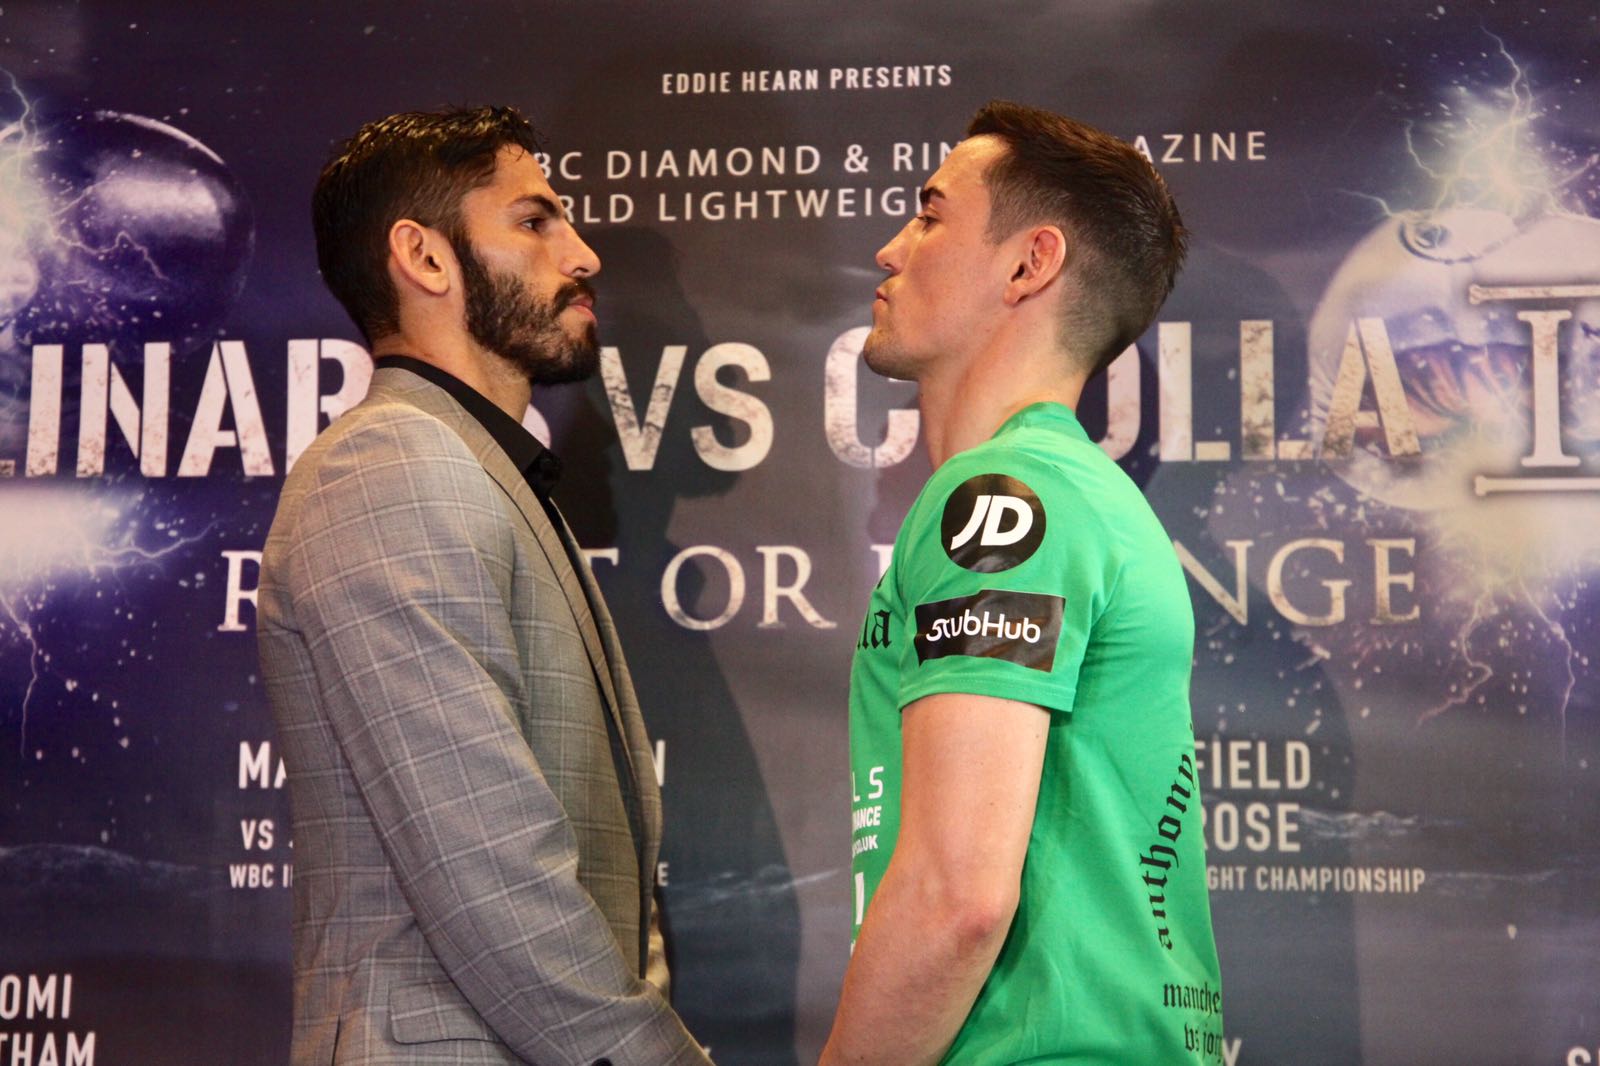 Linares and Crolla promised to do their best in the ring